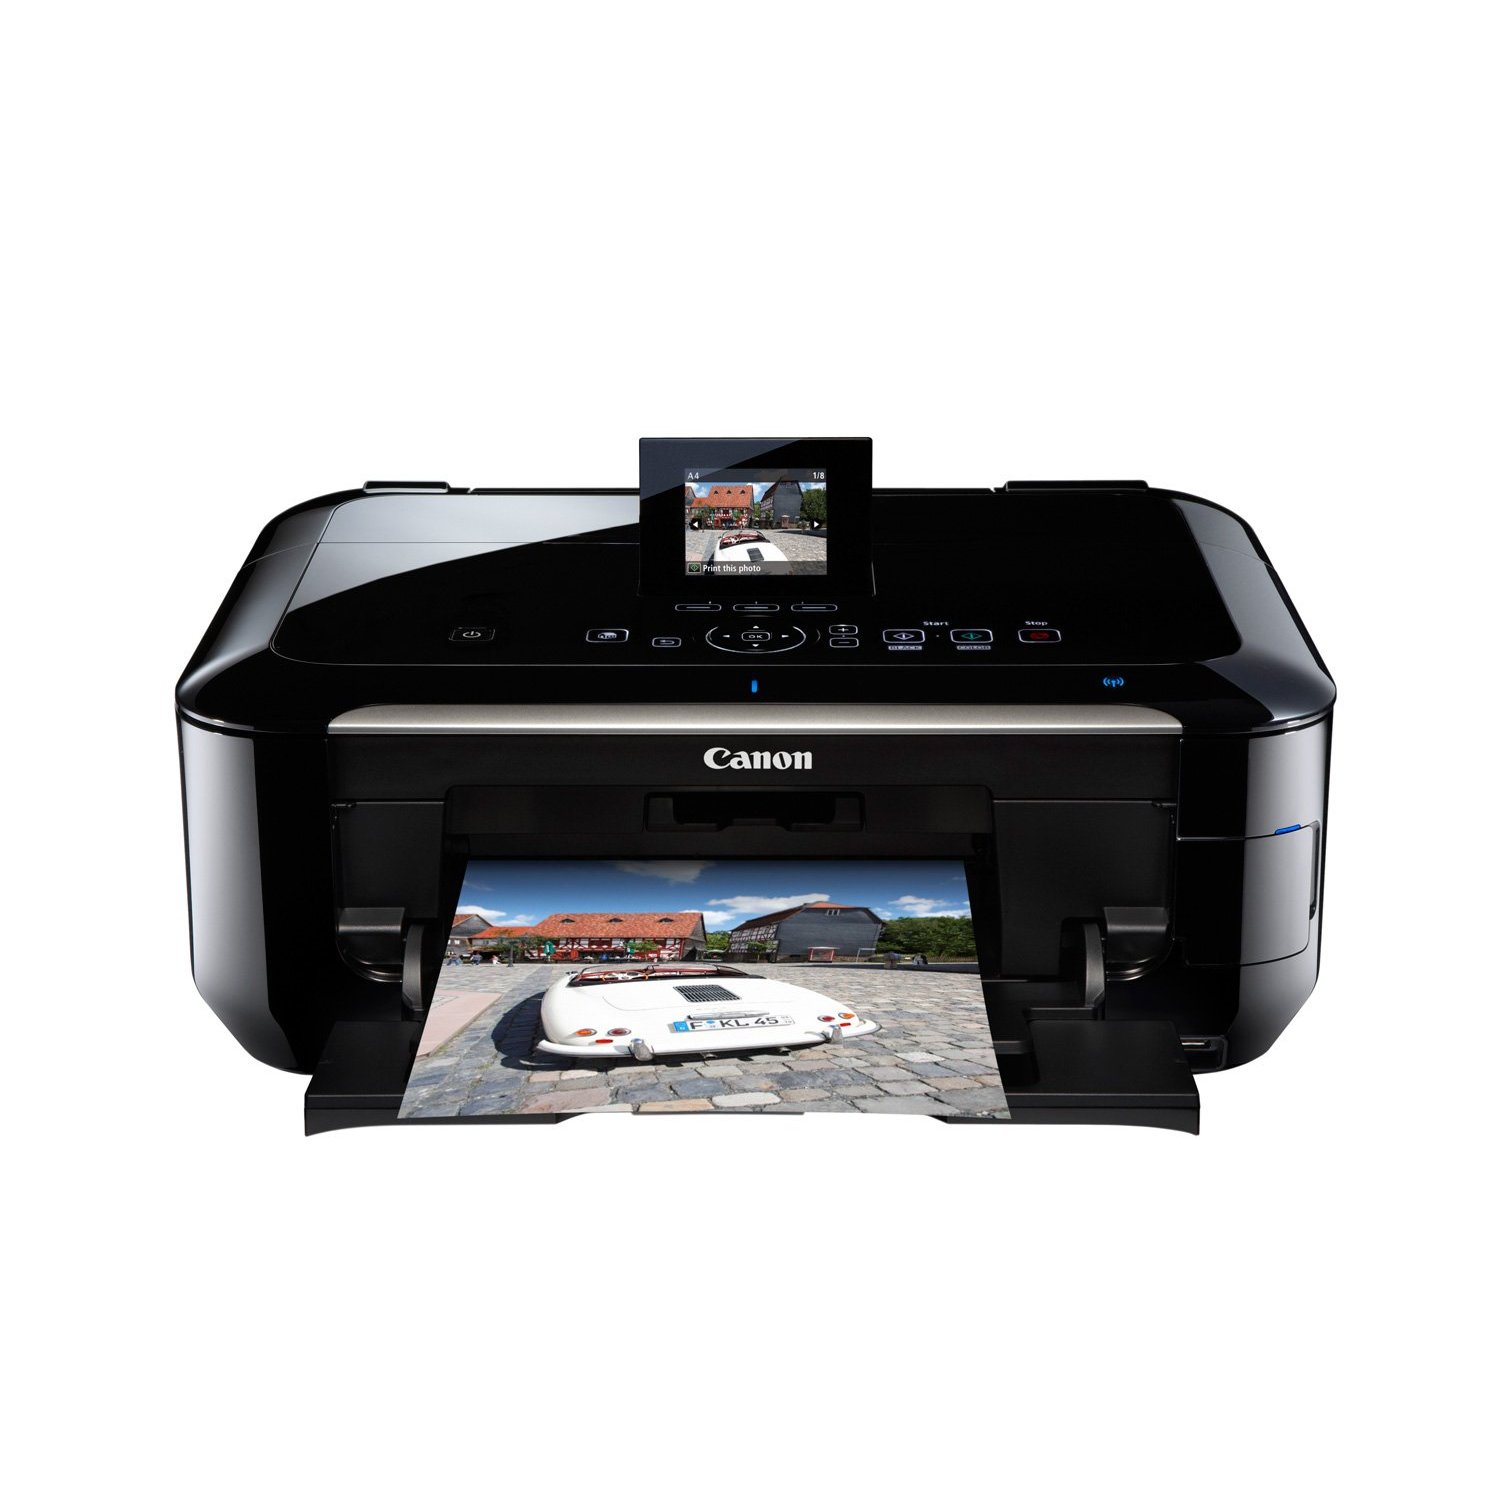 http://thetechjournal.com/wp-content/uploads/images/1109/1316592372-canon-pixmas-new-three-wireless-printers-with-airprint-support-3.jpg